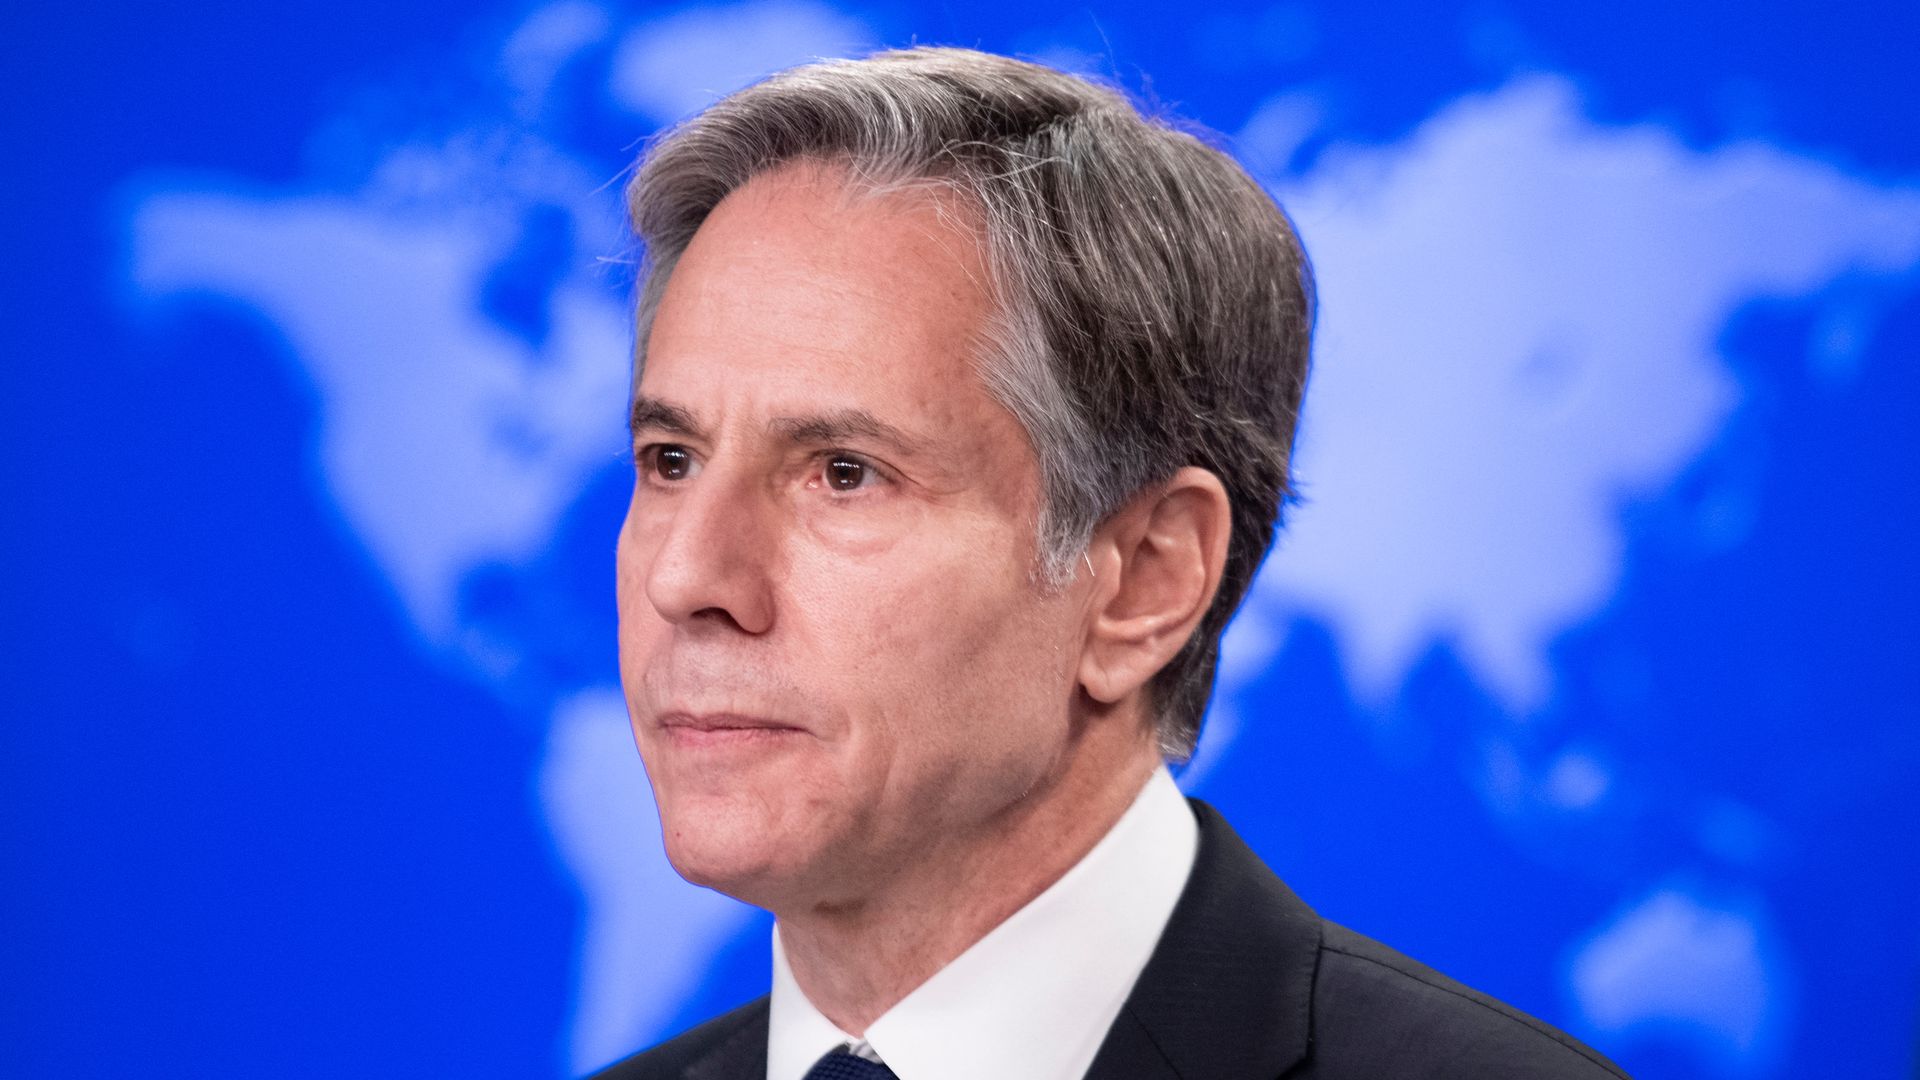 Secretary of State Anthony Blinken during a press conference at the State Department on Aug. 2.